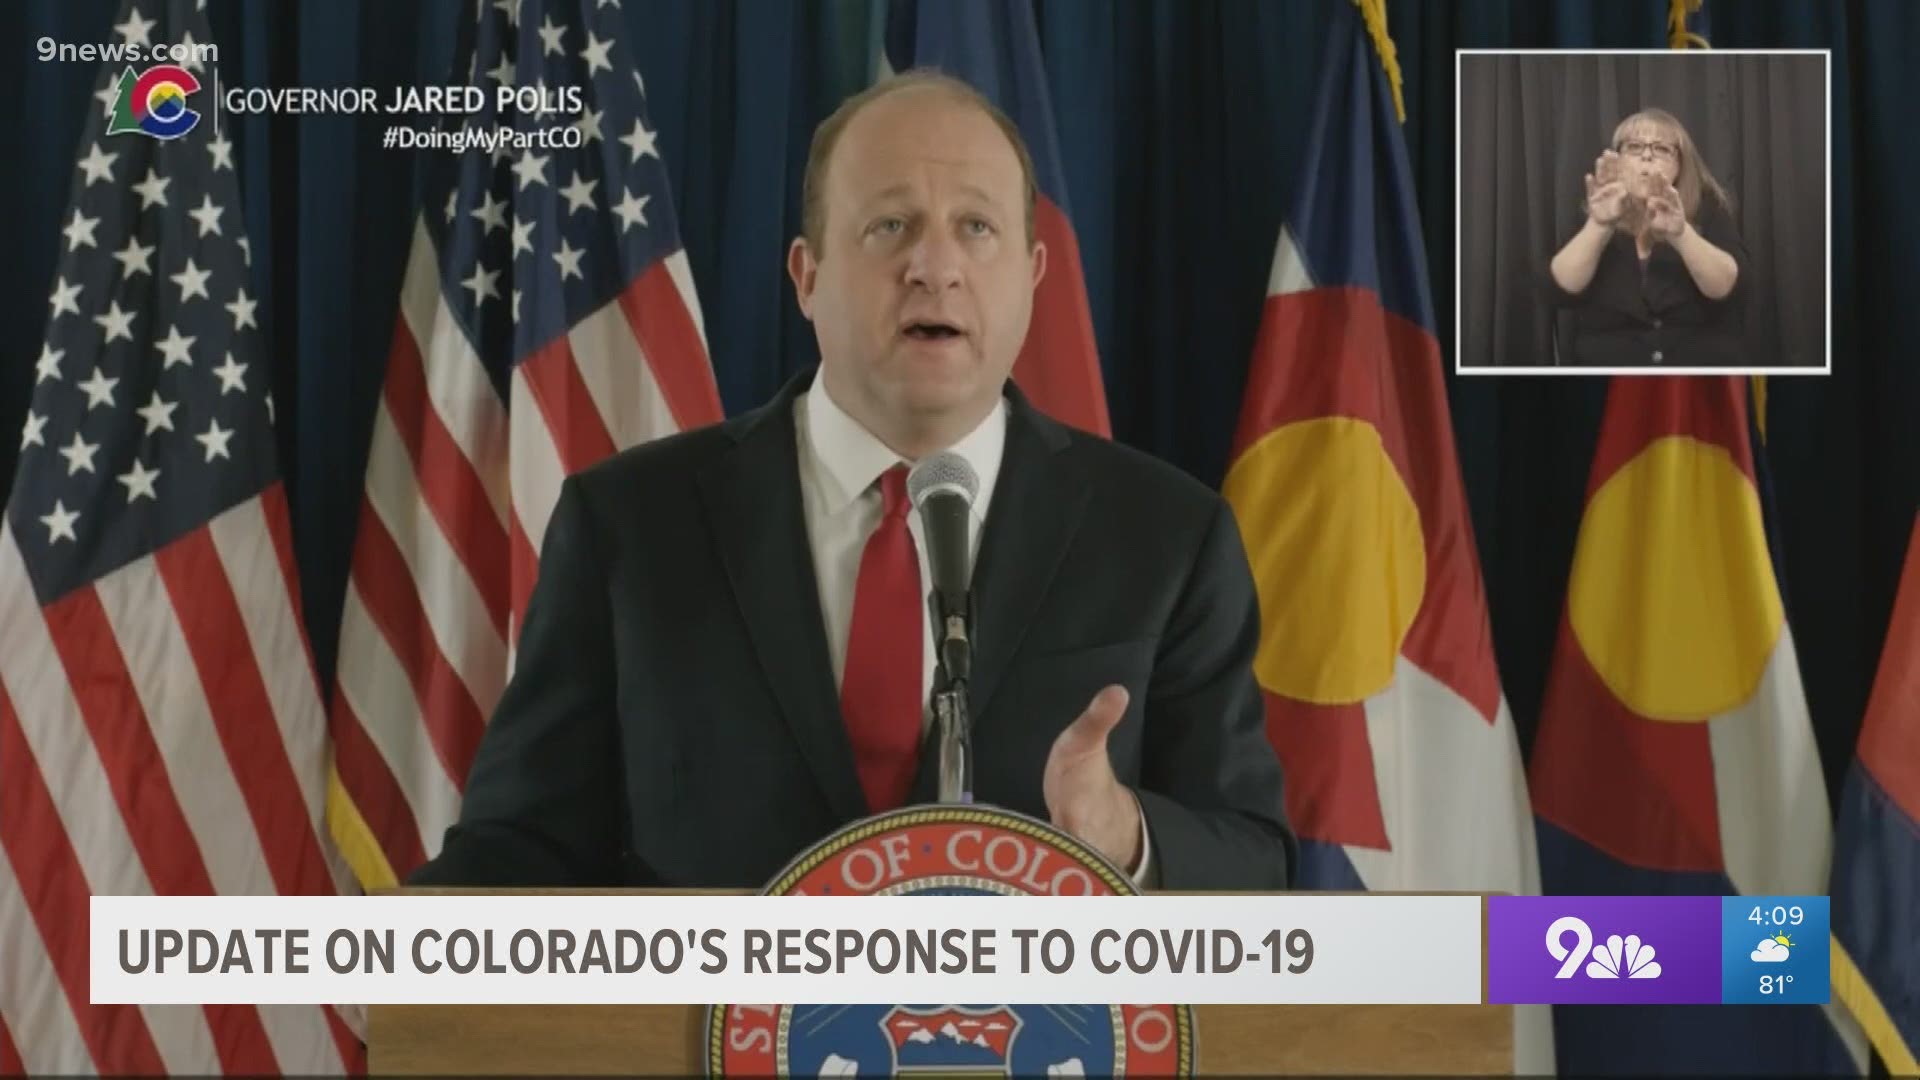 Governor Jared Polis said an uptick in COVID-19 cases in Utah and Arizona is causing him concern.